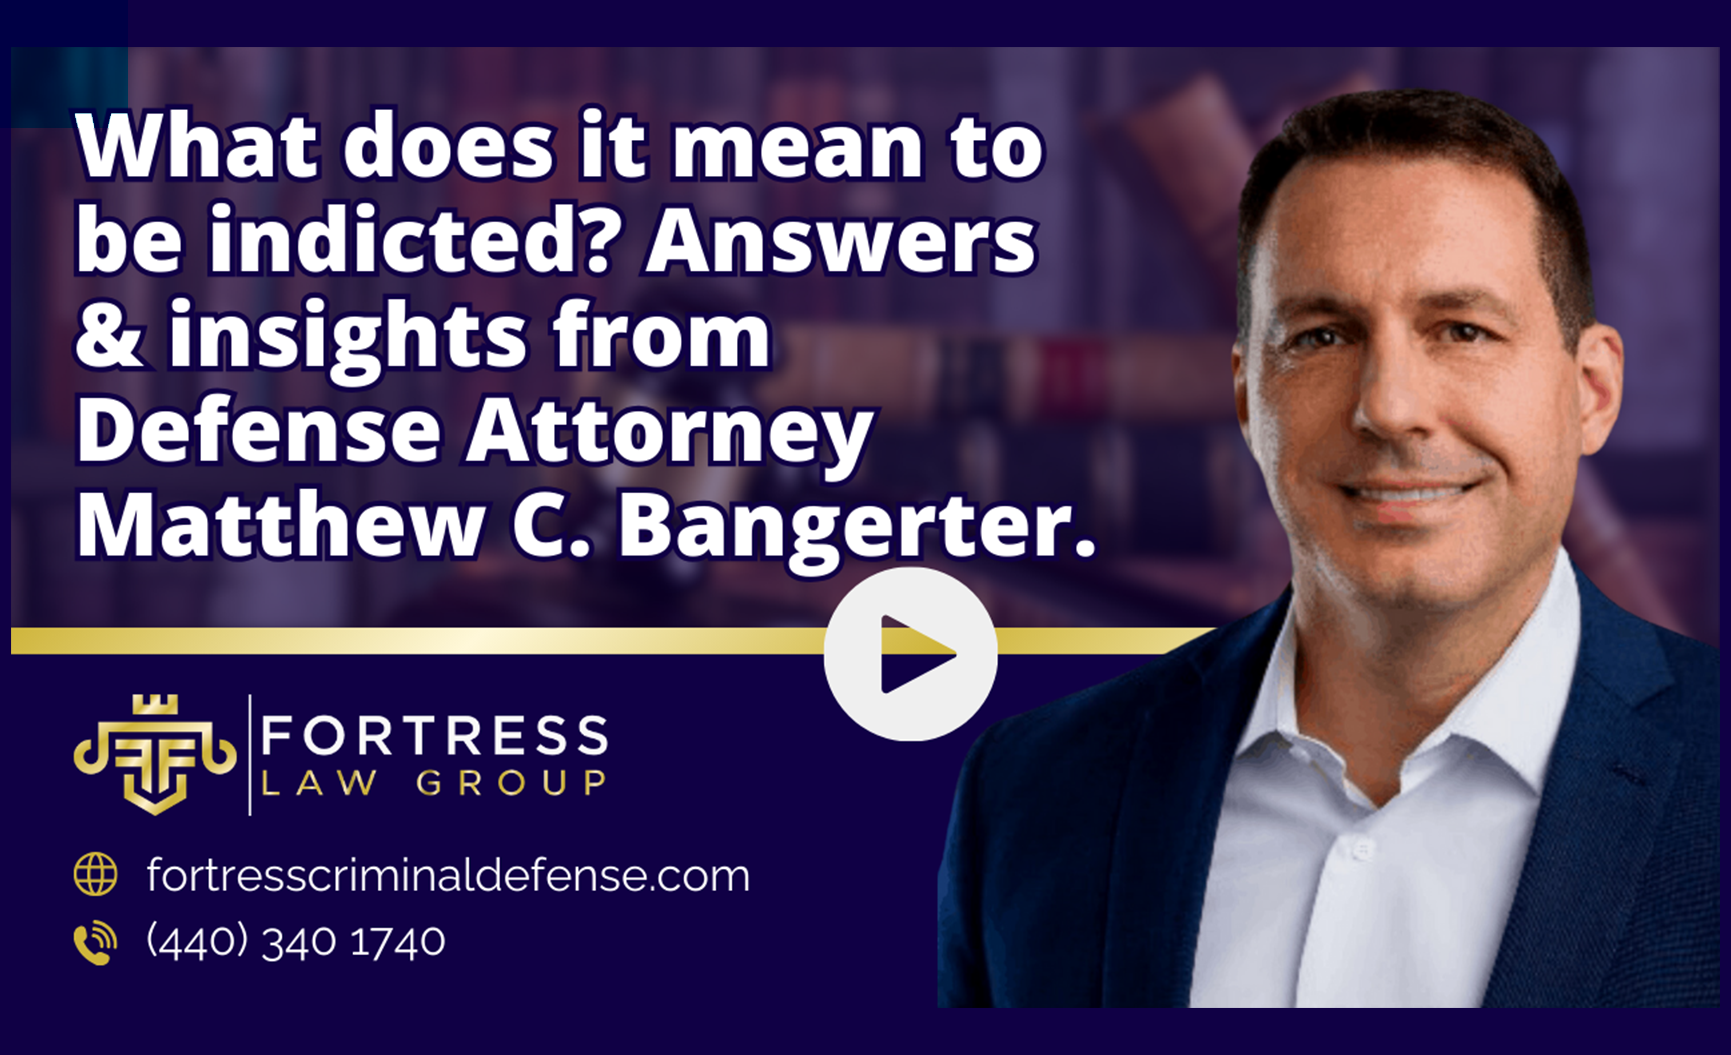 What Does it Mean to be Indicted? Answers & Insights from Defense Attorney Matthew C. Bangerter.